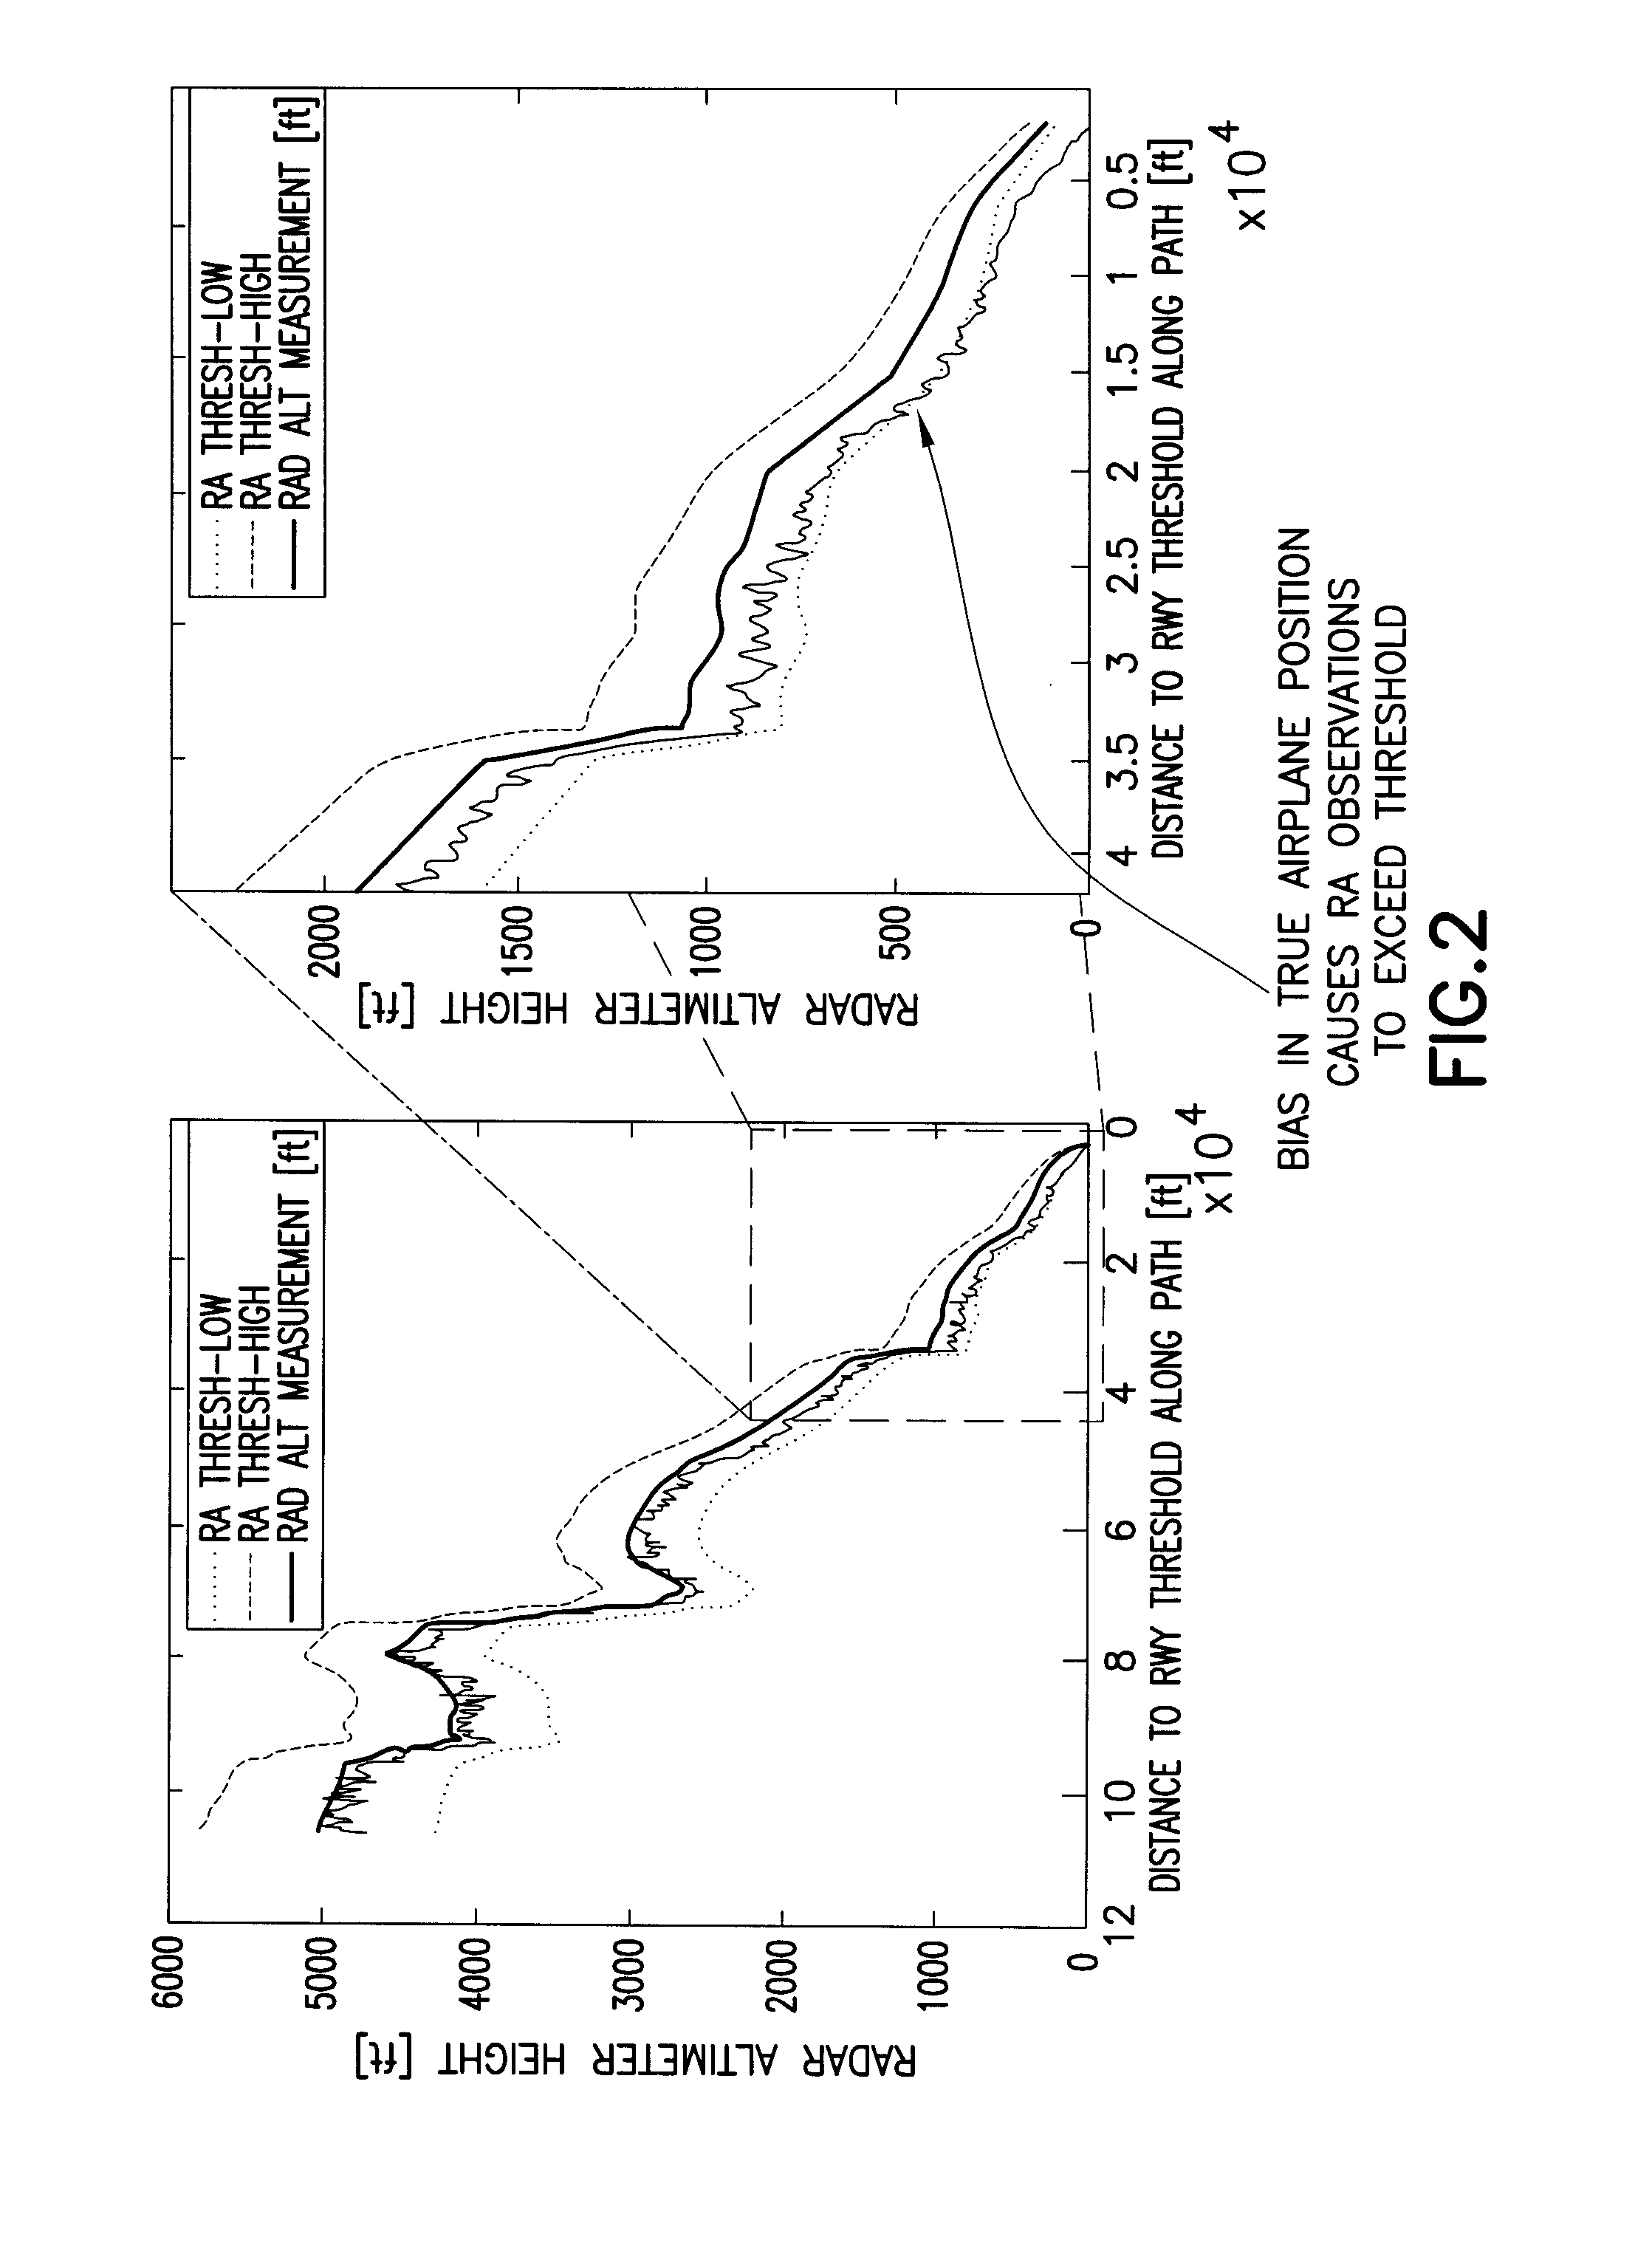 Vertical Required Navigation Performance Containment with Radio Altitude